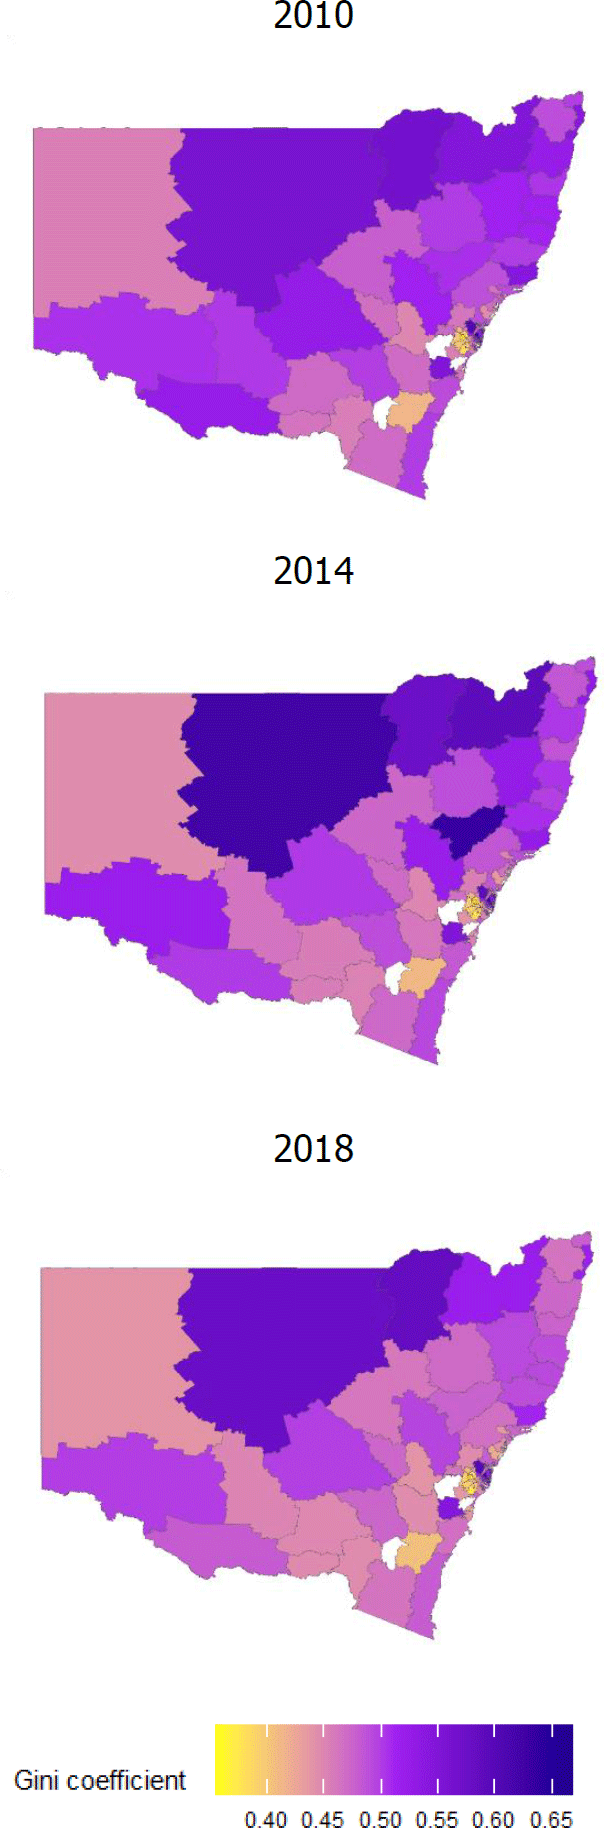 Figure 2: Income Inequality Gini Coefficient map within each Statistical Area 3 for NSW in 2010, 2014 and 2018. Details described in discussion paper.